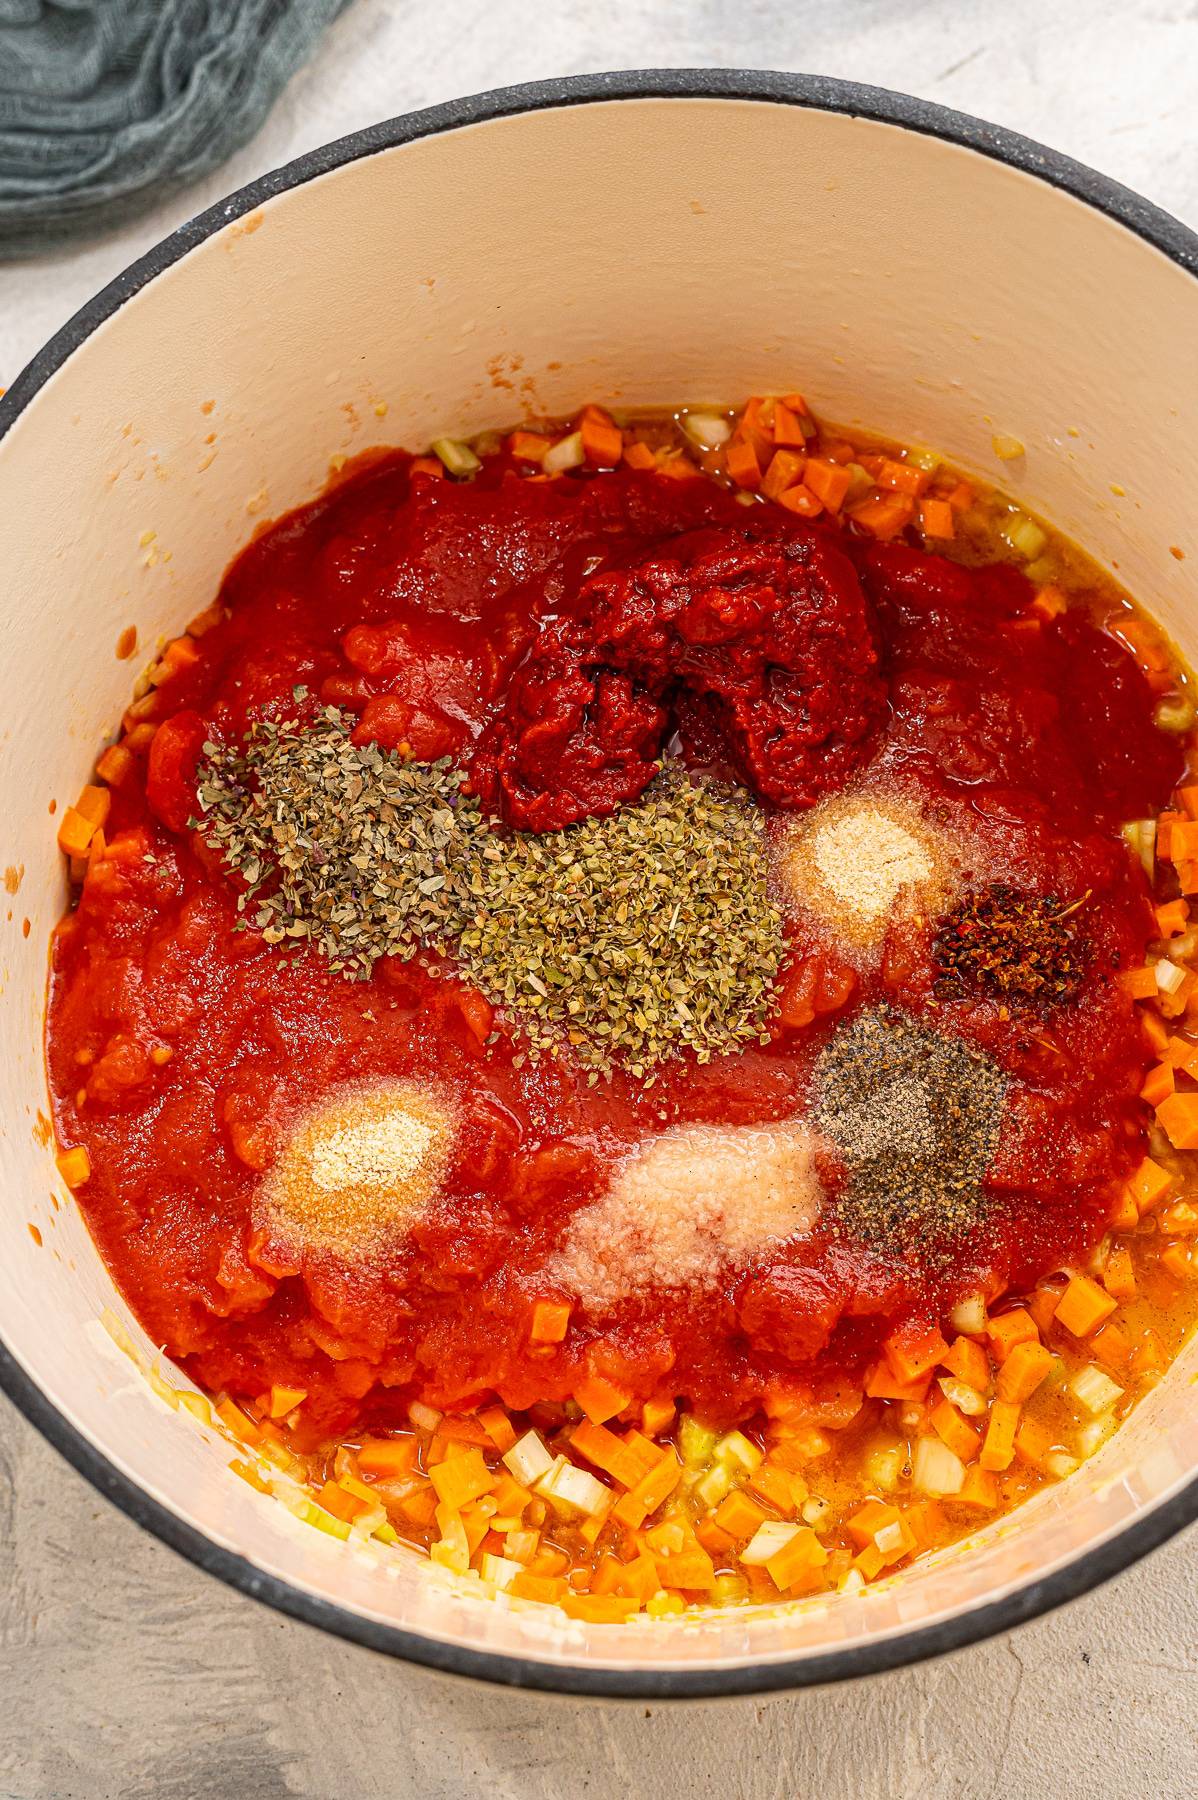 Spices in the Pot Make Rustic Tomato Vegetarian Soup